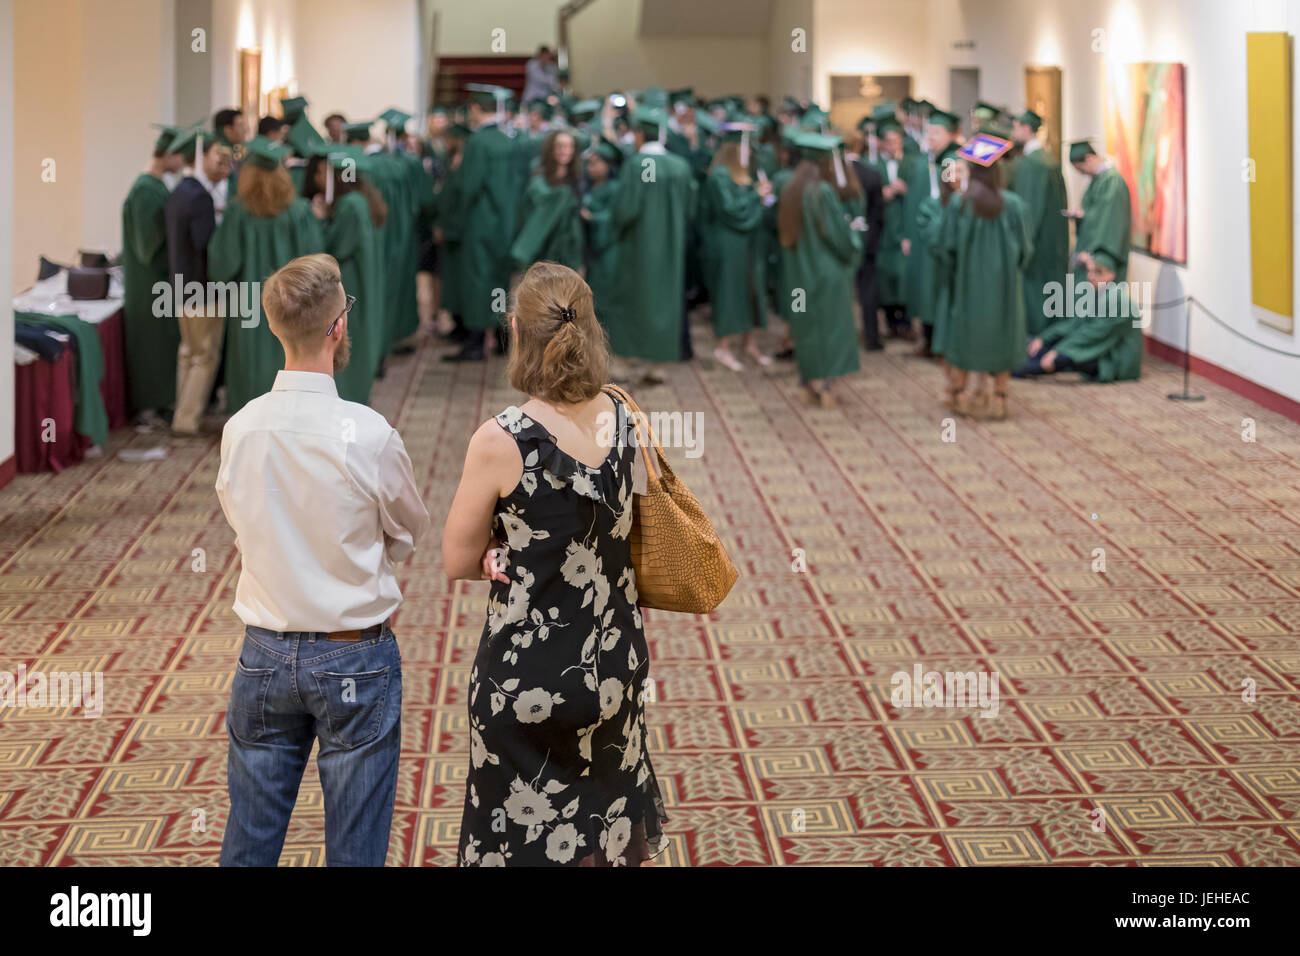 Washington, DC - Parents watch as students get ready for their graduation ceremony at Georgetown Day School. Stock Photo